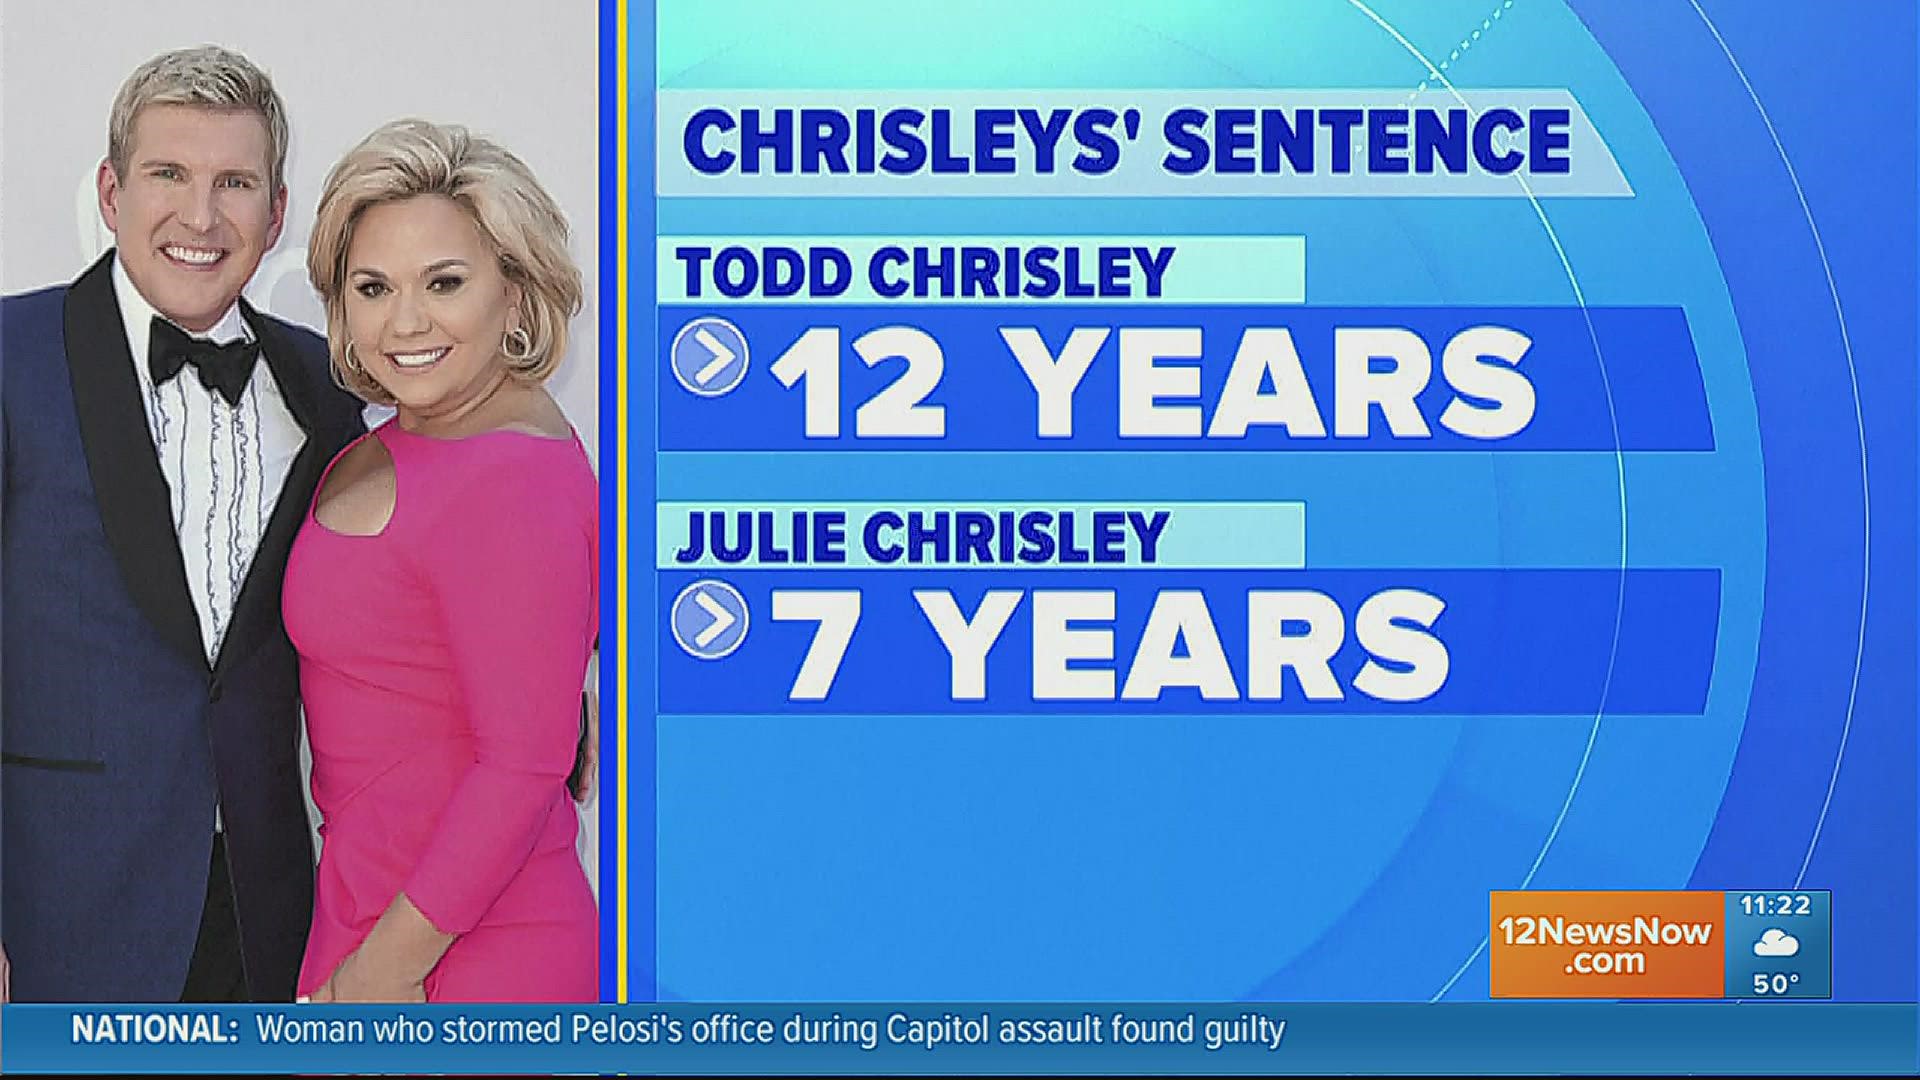 The Chrisleys are accused of swindling at least $30 million from community banks.